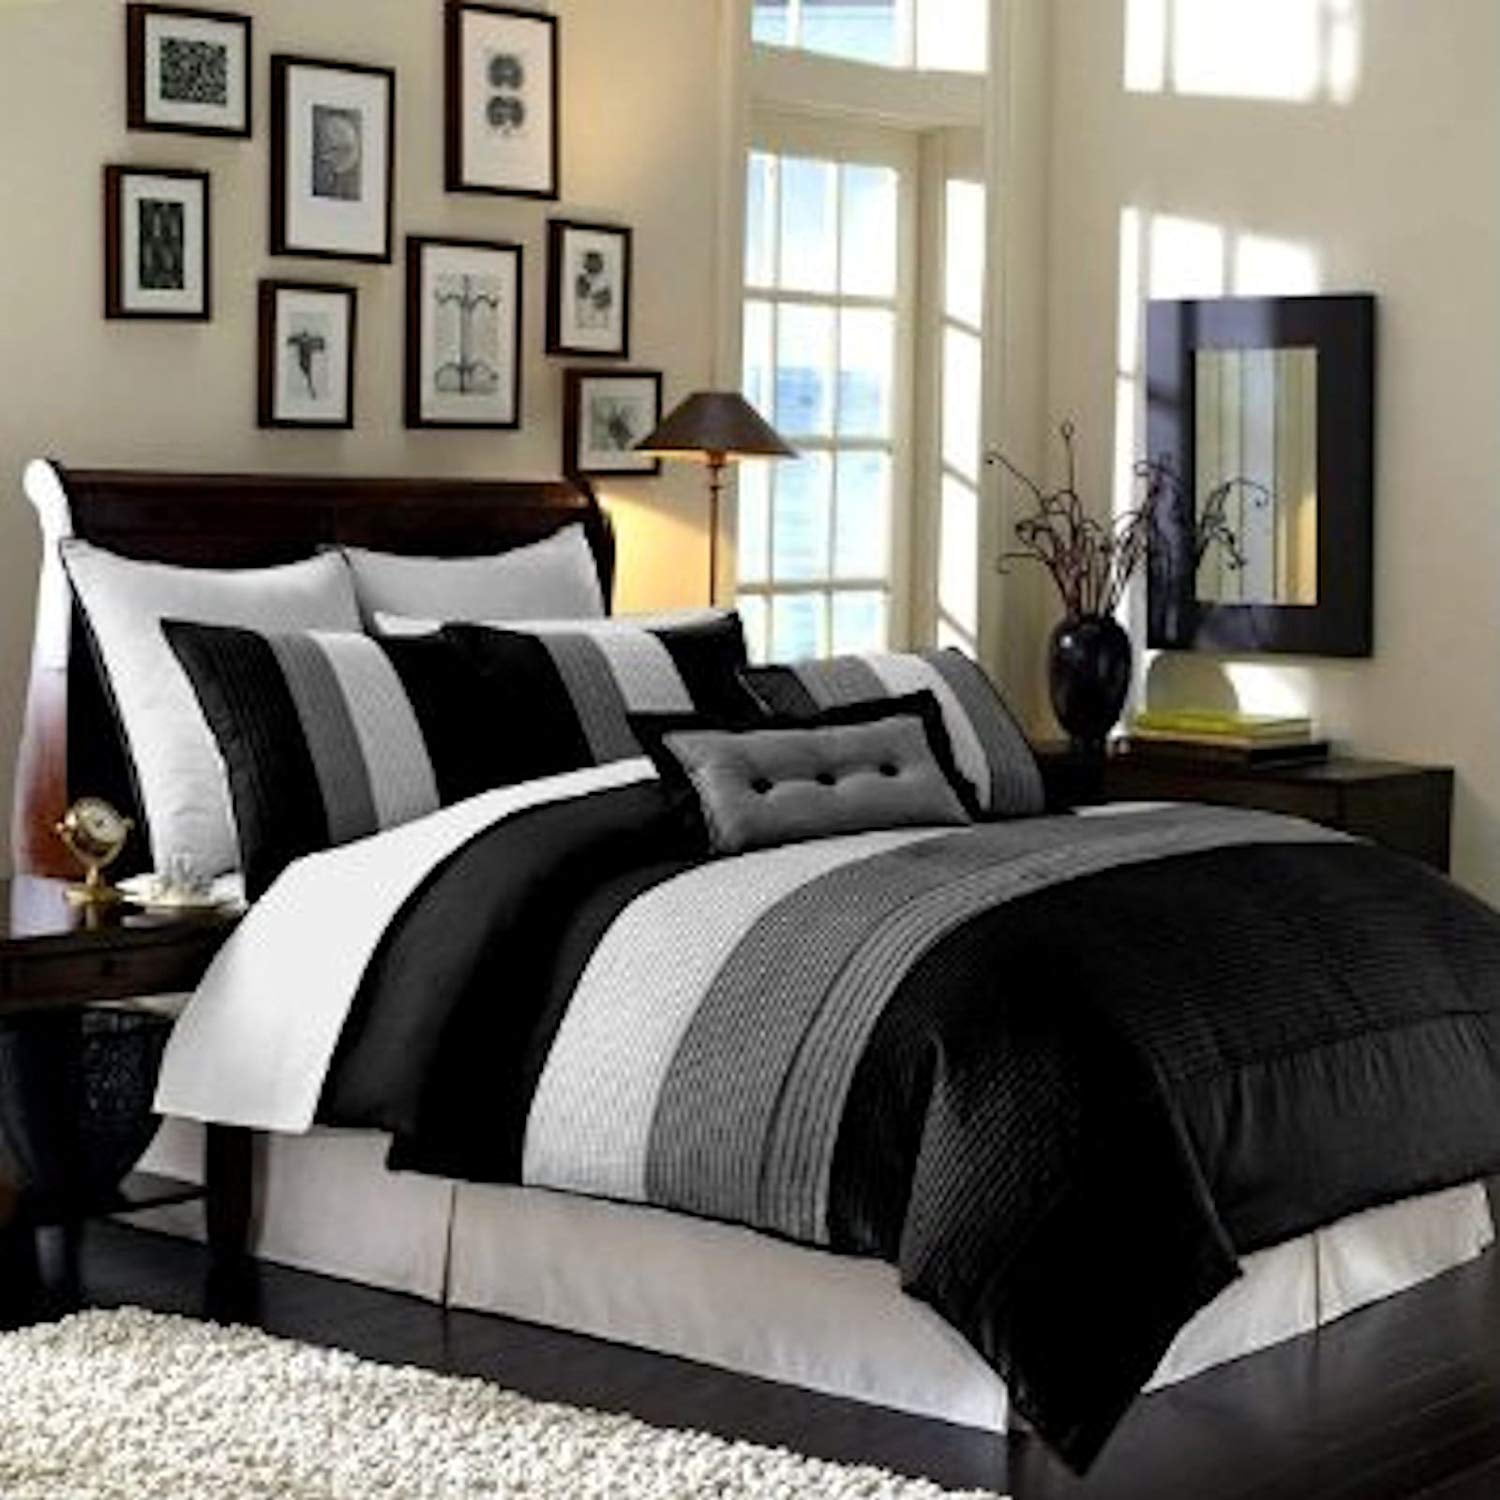 Luxury 8-Piece Stripe Comforter Bed-in-a-Bag Set  Black/White/Gray New. 